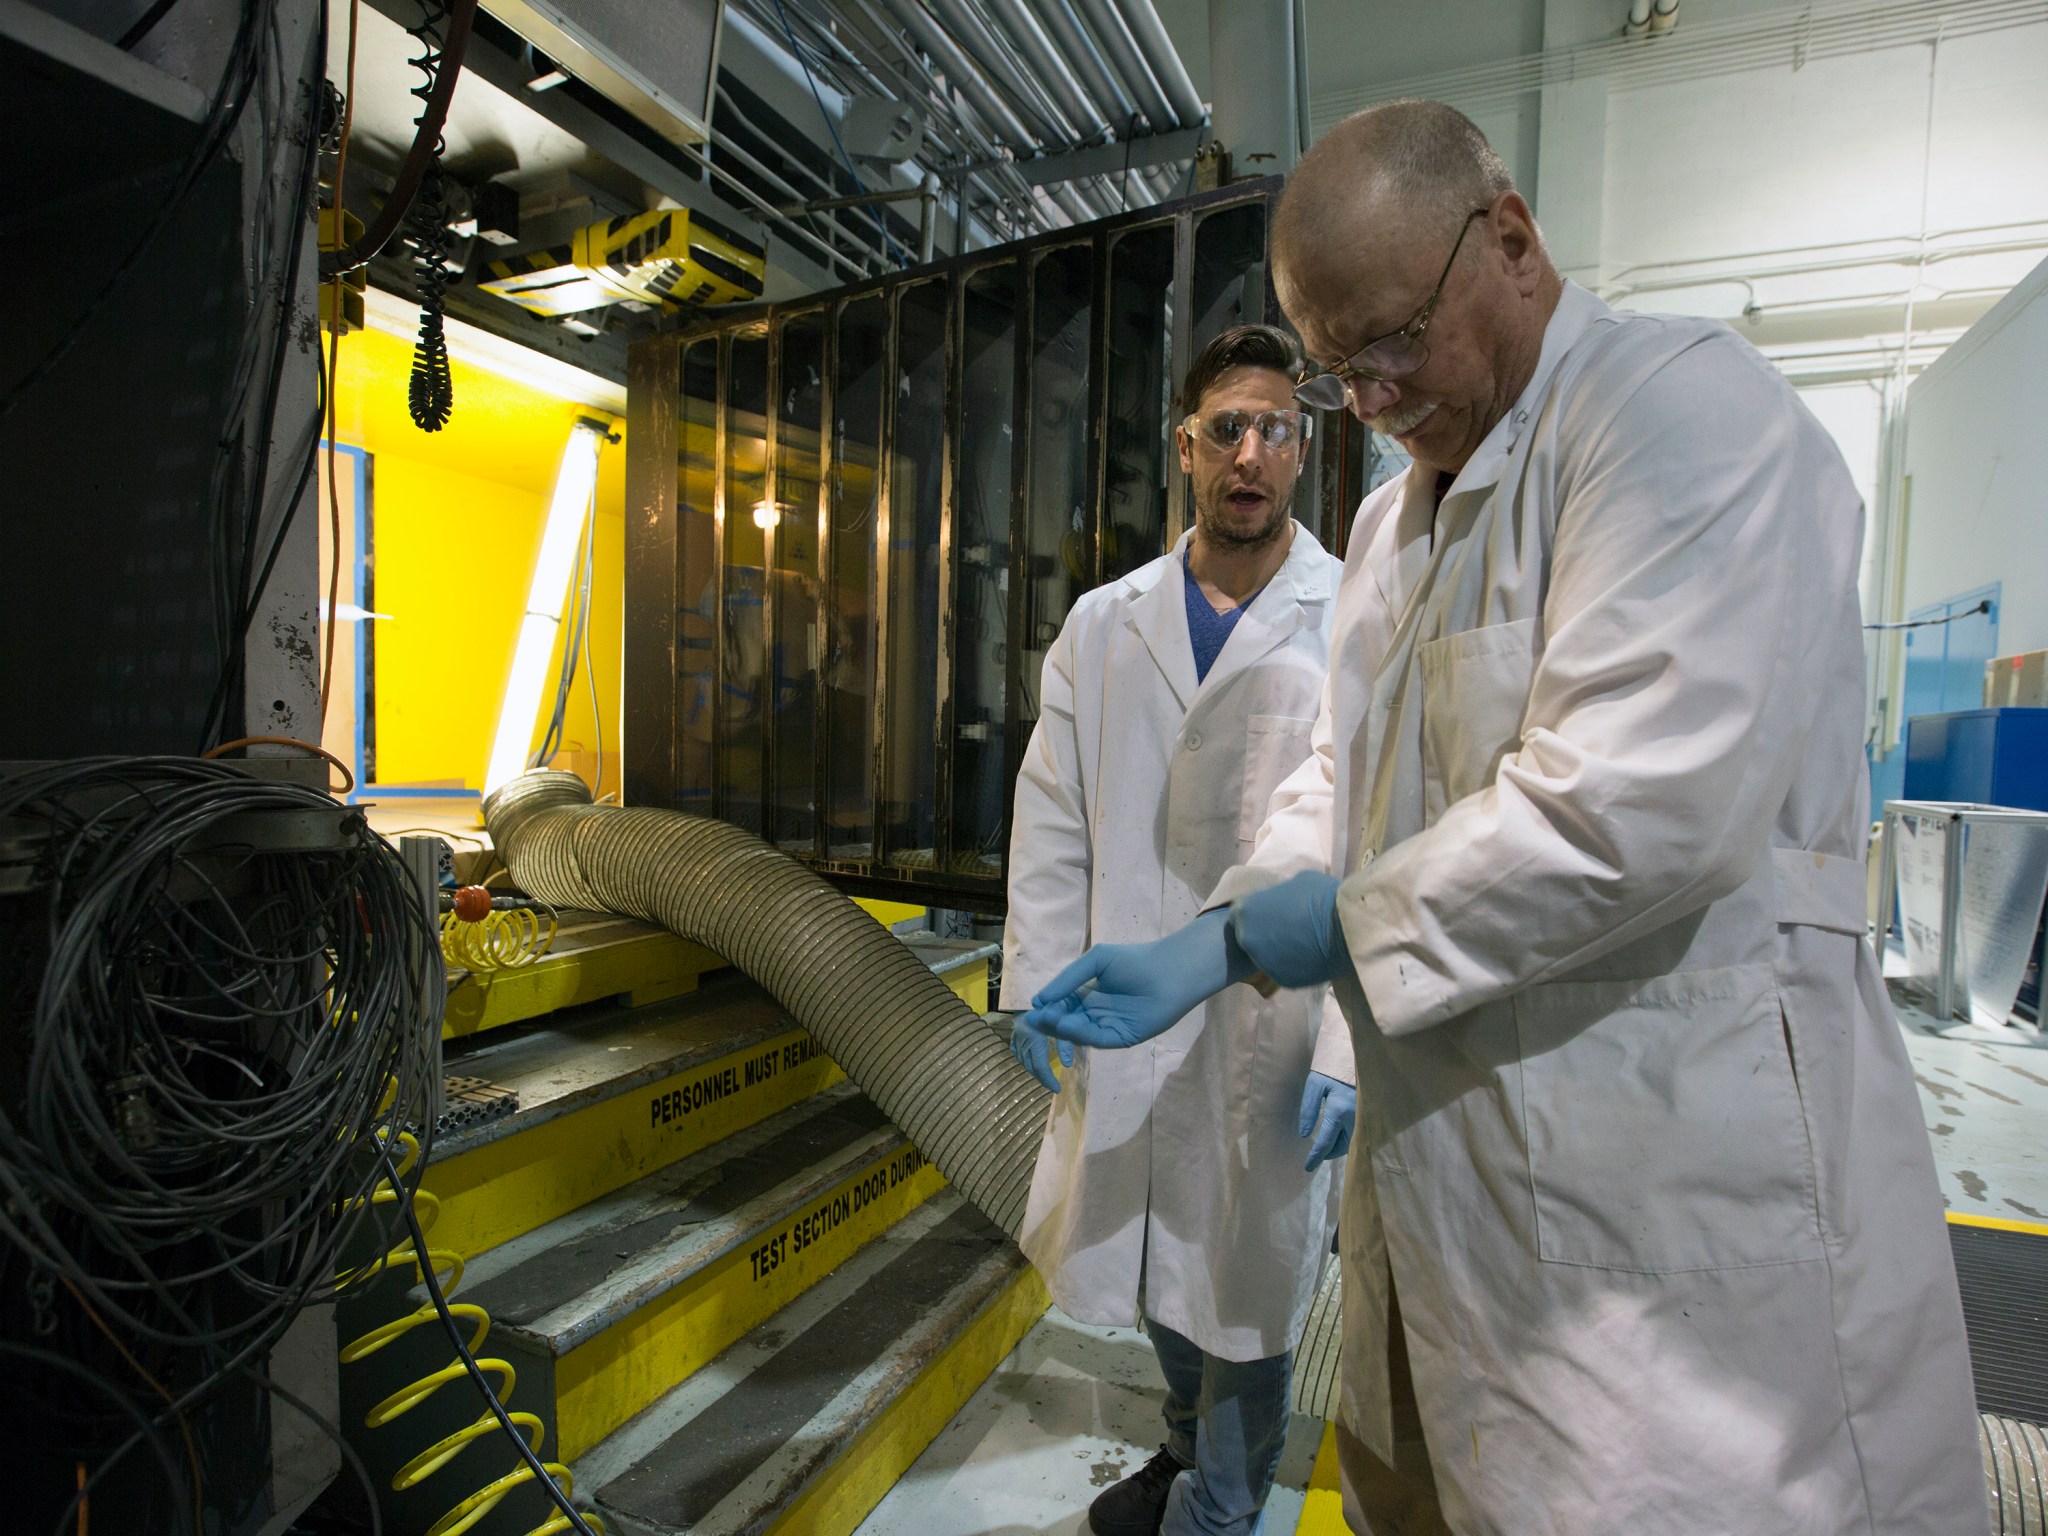 Kyle Goodman, left, is assisting Bill Lipford paint a scaled model of the Space Launch System.